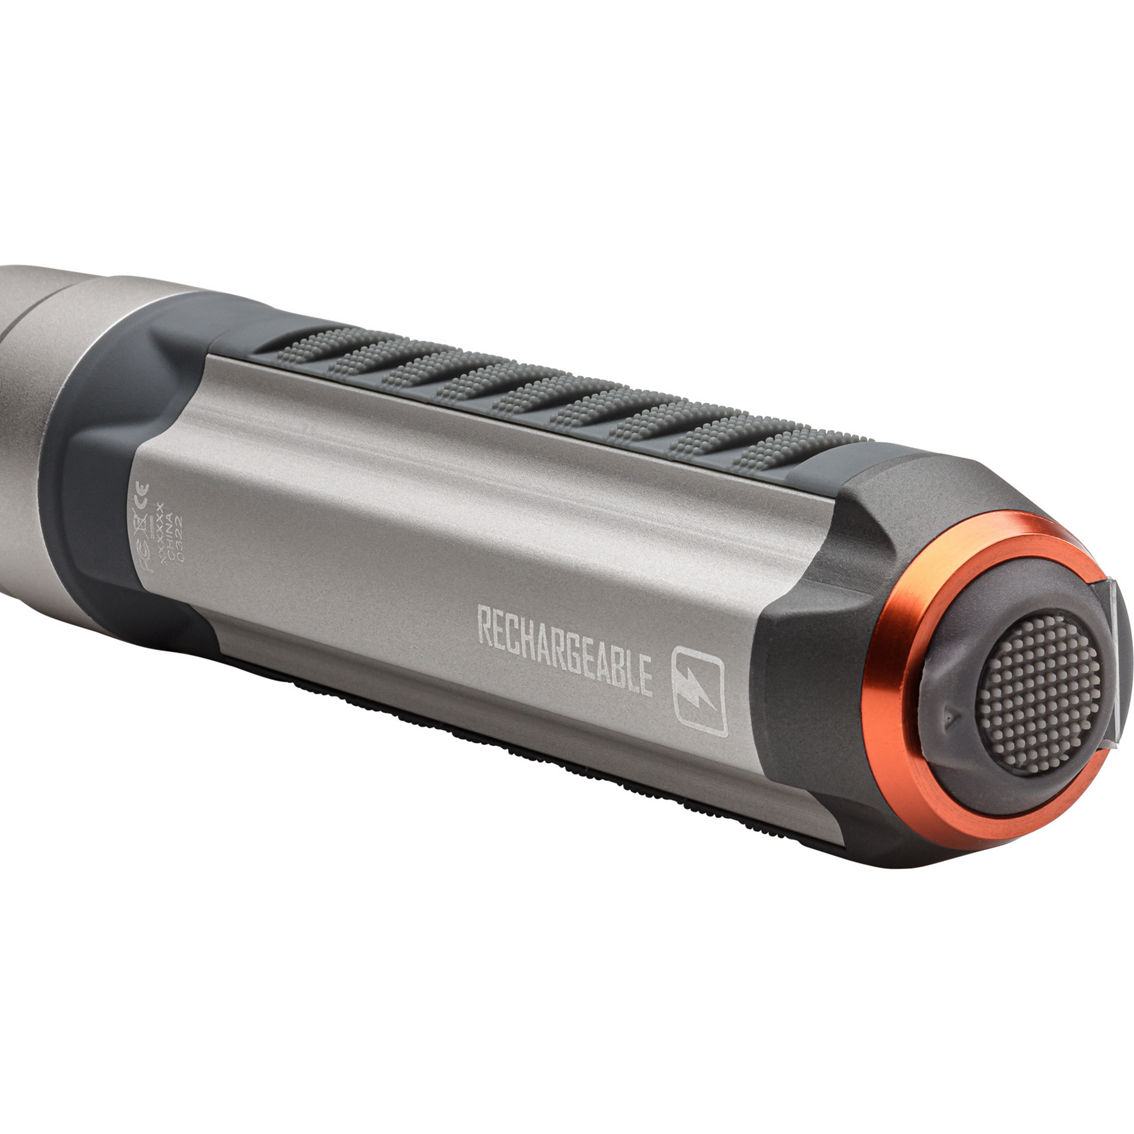 Bushnell Rubicon 500L Rechargeable Flashlight - Image 4 of 4